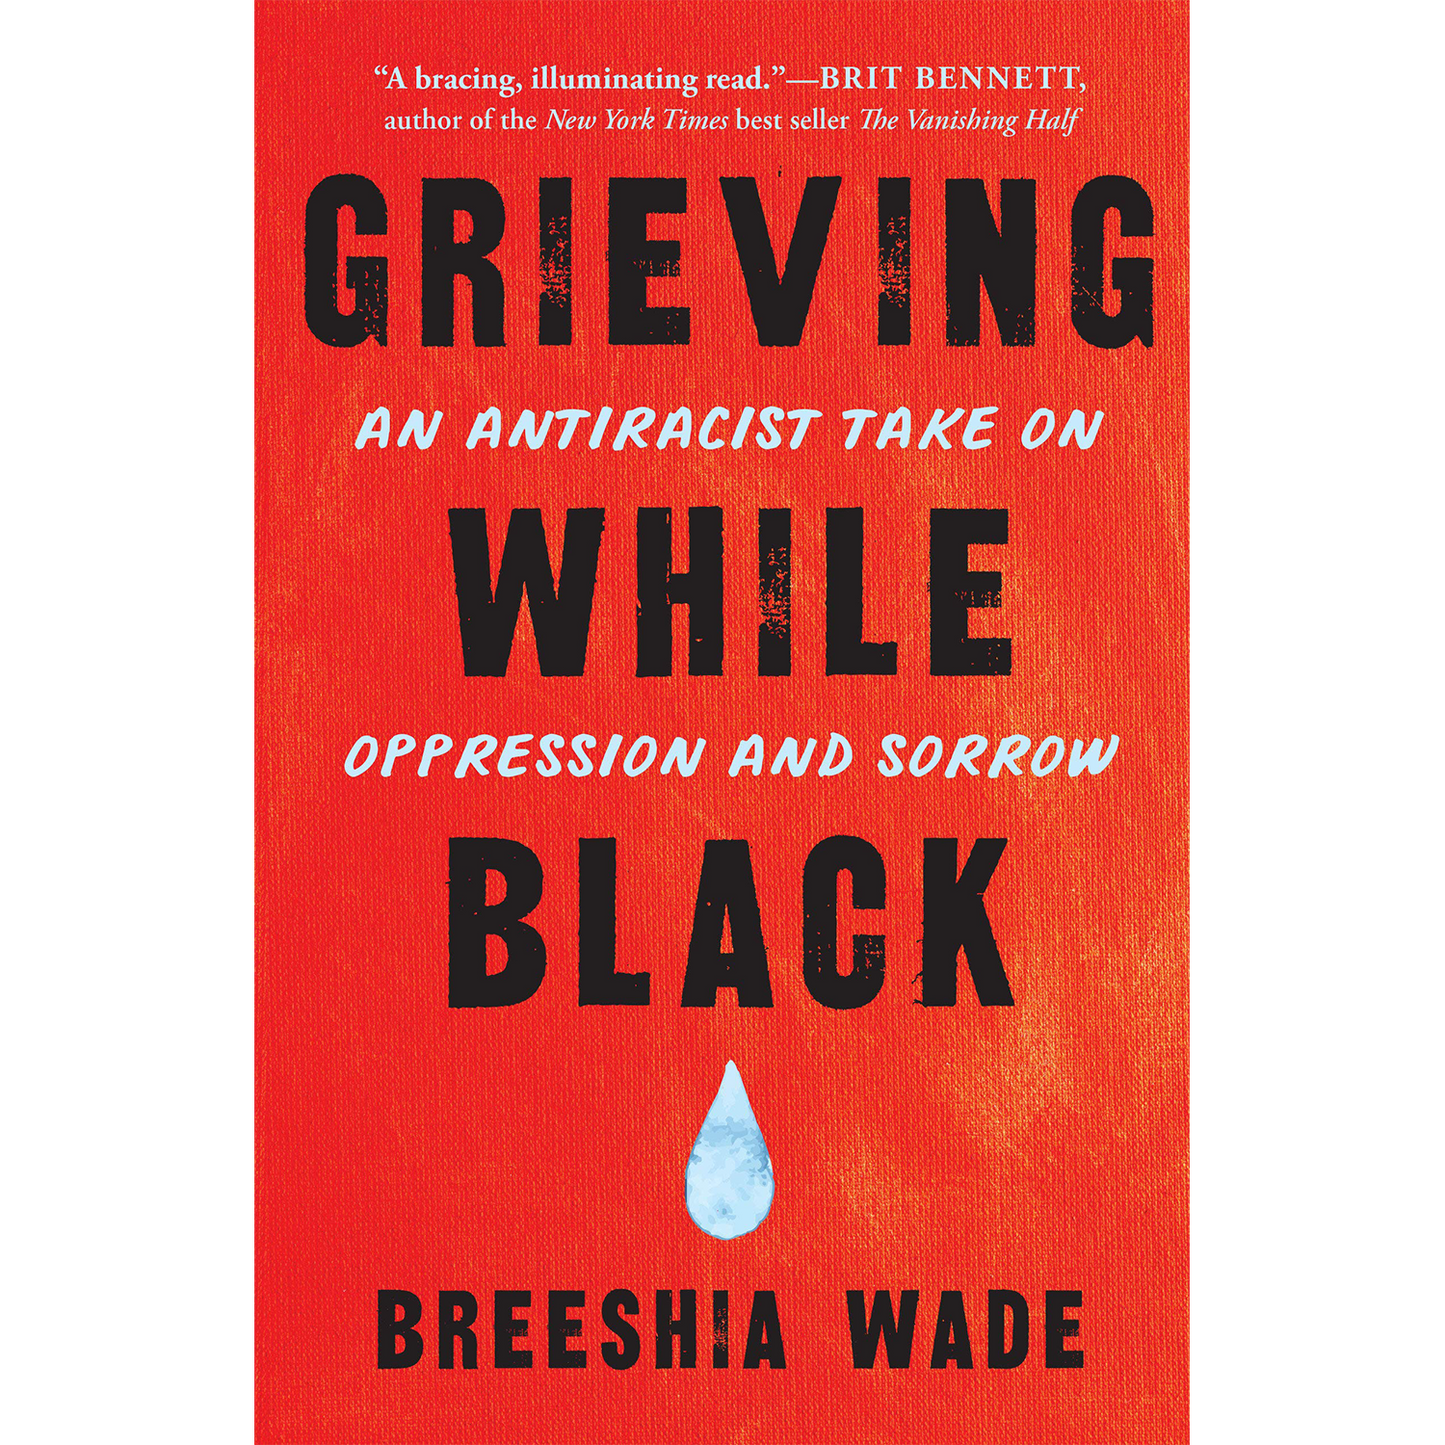 Grieving While Black: An Antiracist Take on Oppression and Sorrow (Paperback)